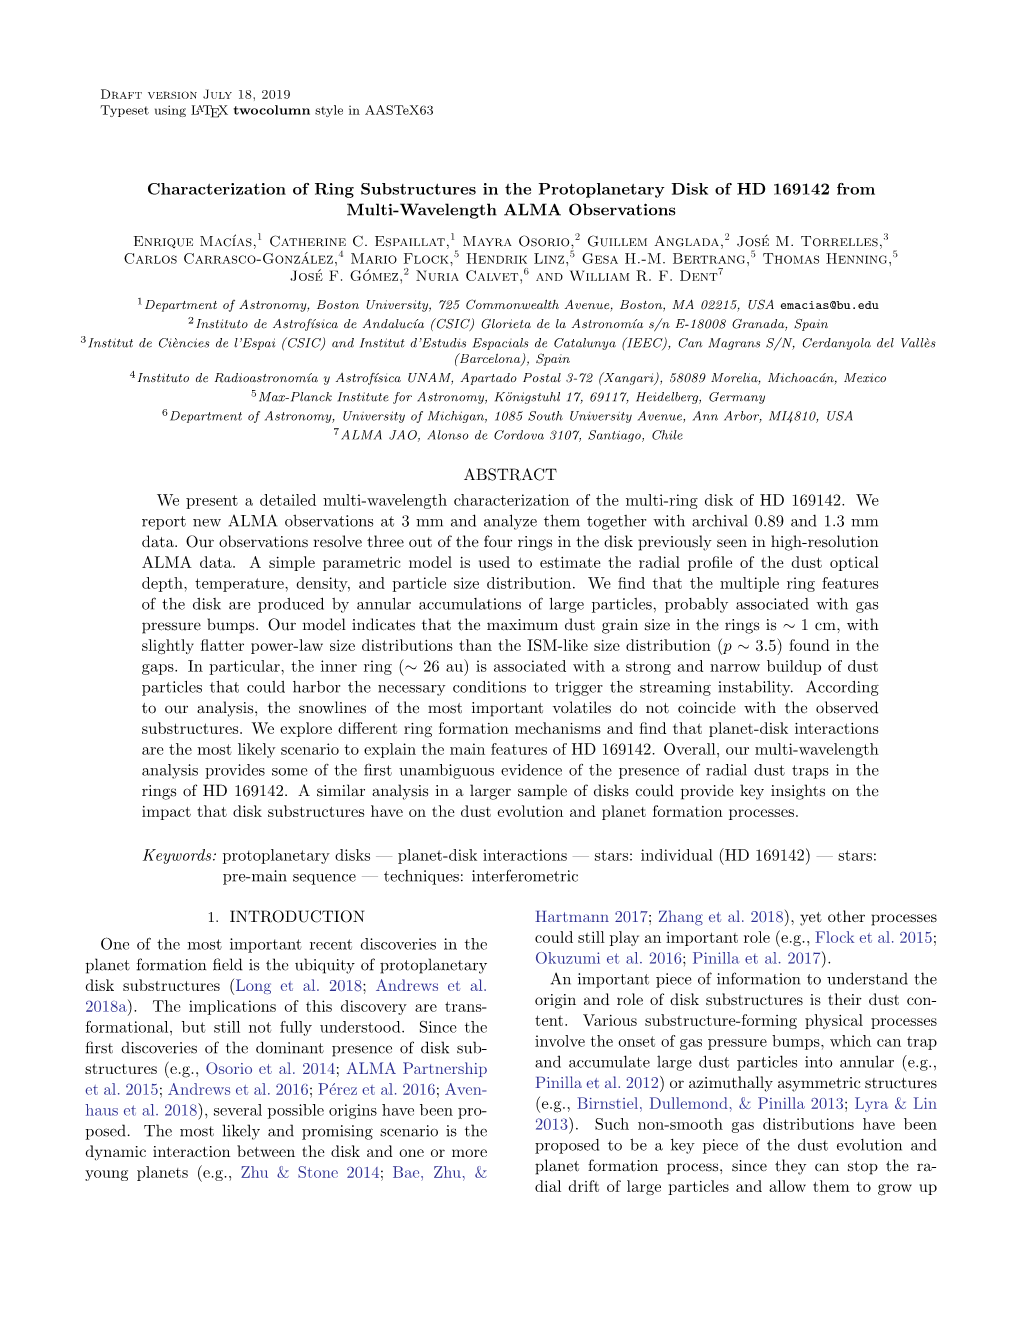 Characterization of Ring Substructures in the Protoplanetary Disk of HD 169142 from Multi-Wavelength ALMA Observations ABSTRACT